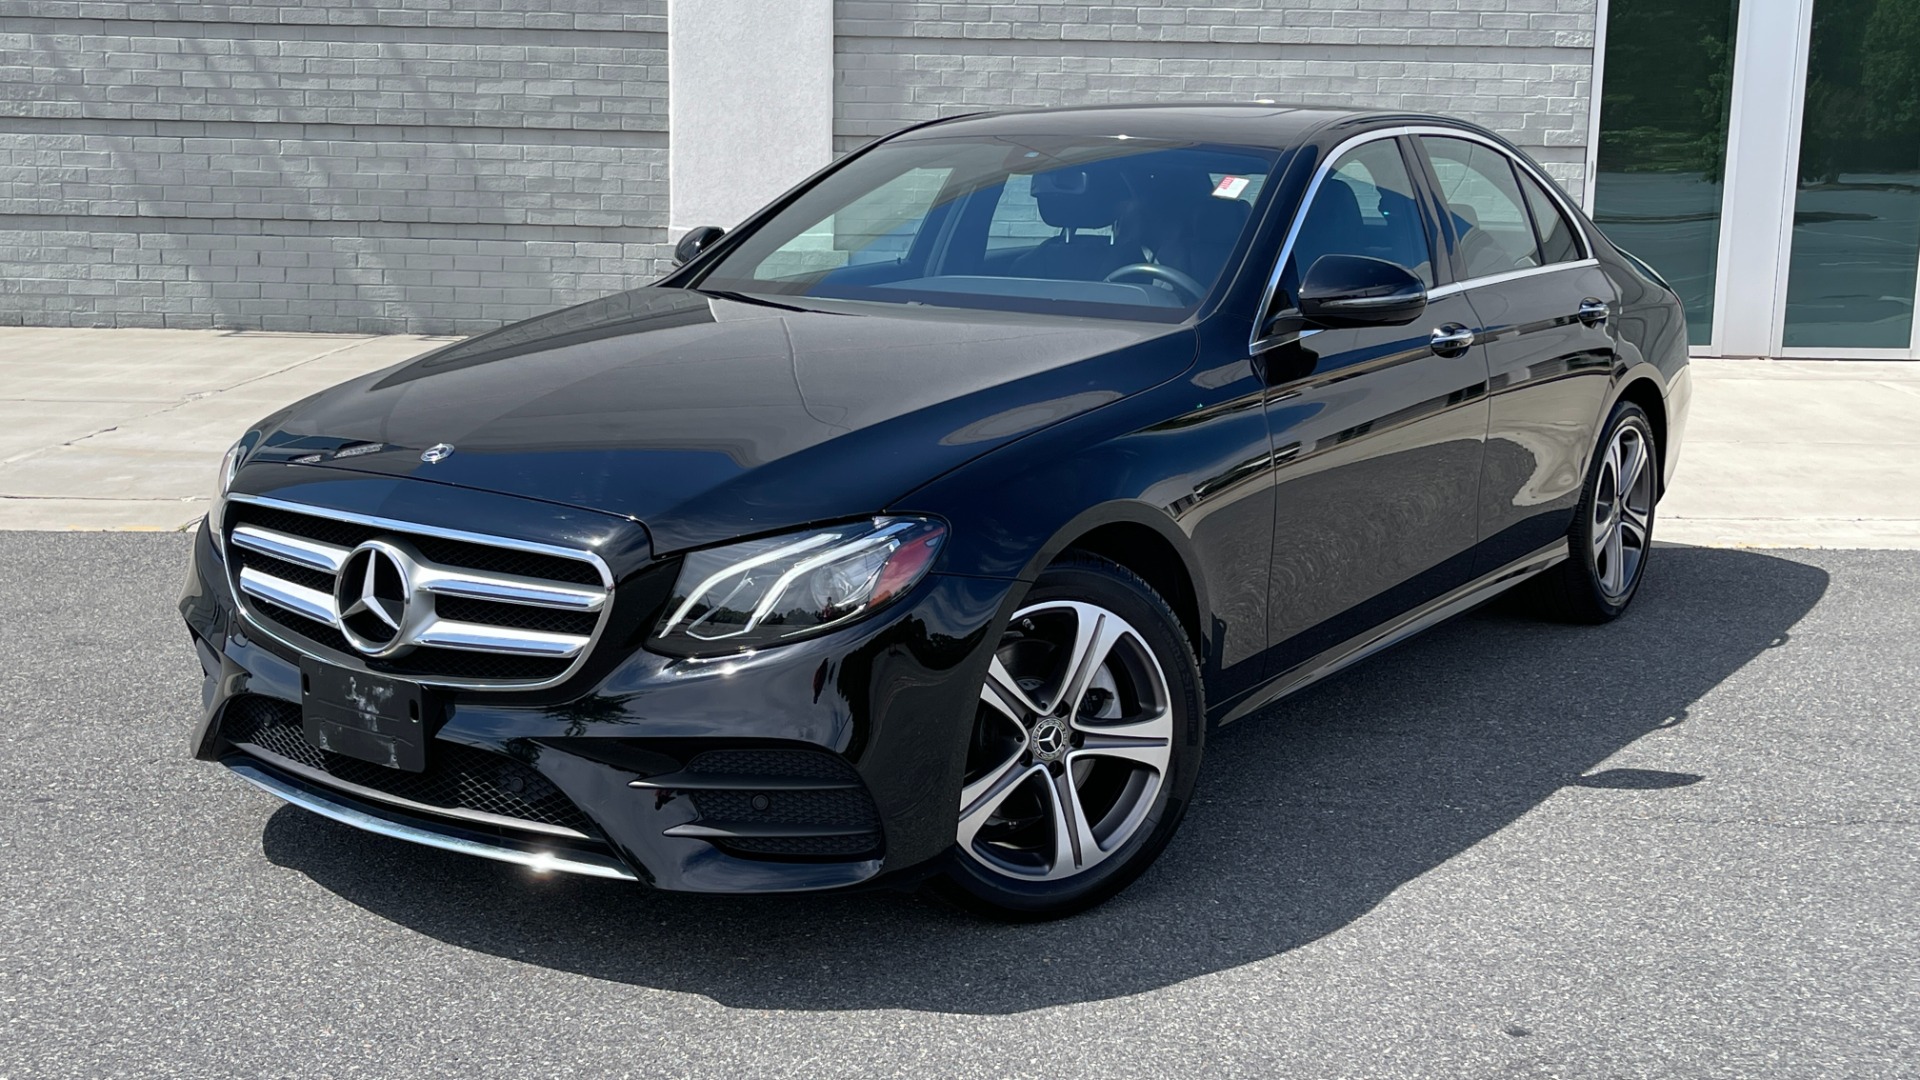 Used 2019 Mercedes-Benz E-Class E300 / 4MATIC / BURMESTER SOUND / PREMIUM PACKAGE / BLIND SPOT ASSIST for sale Sold at Formula Imports in Charlotte NC 28227 44